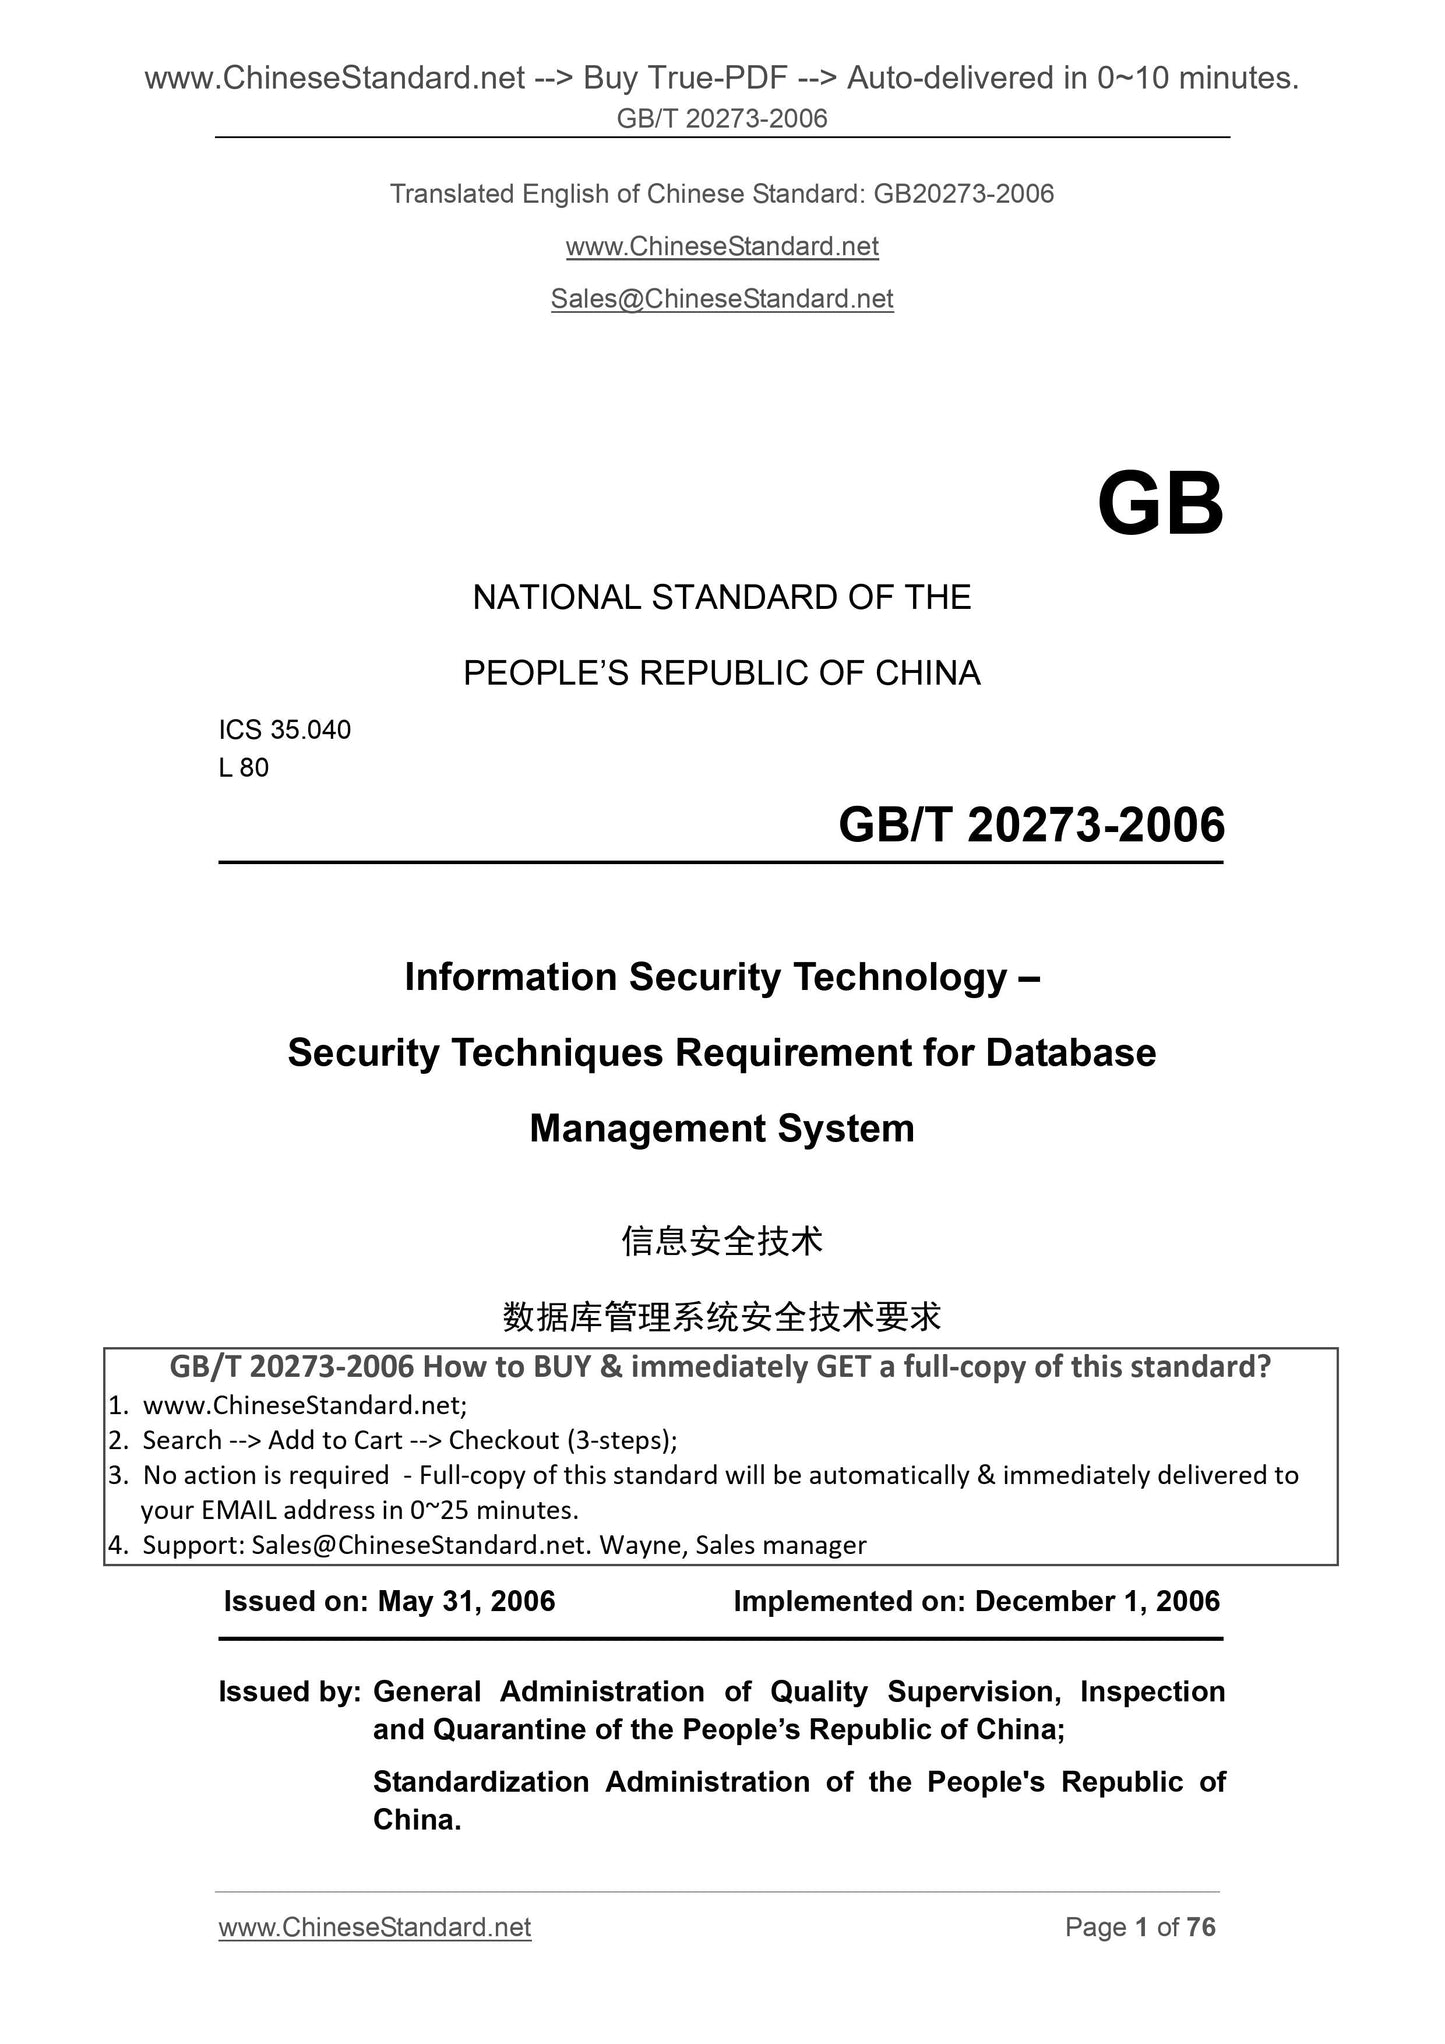 GB/T 20273-2006 Page 1